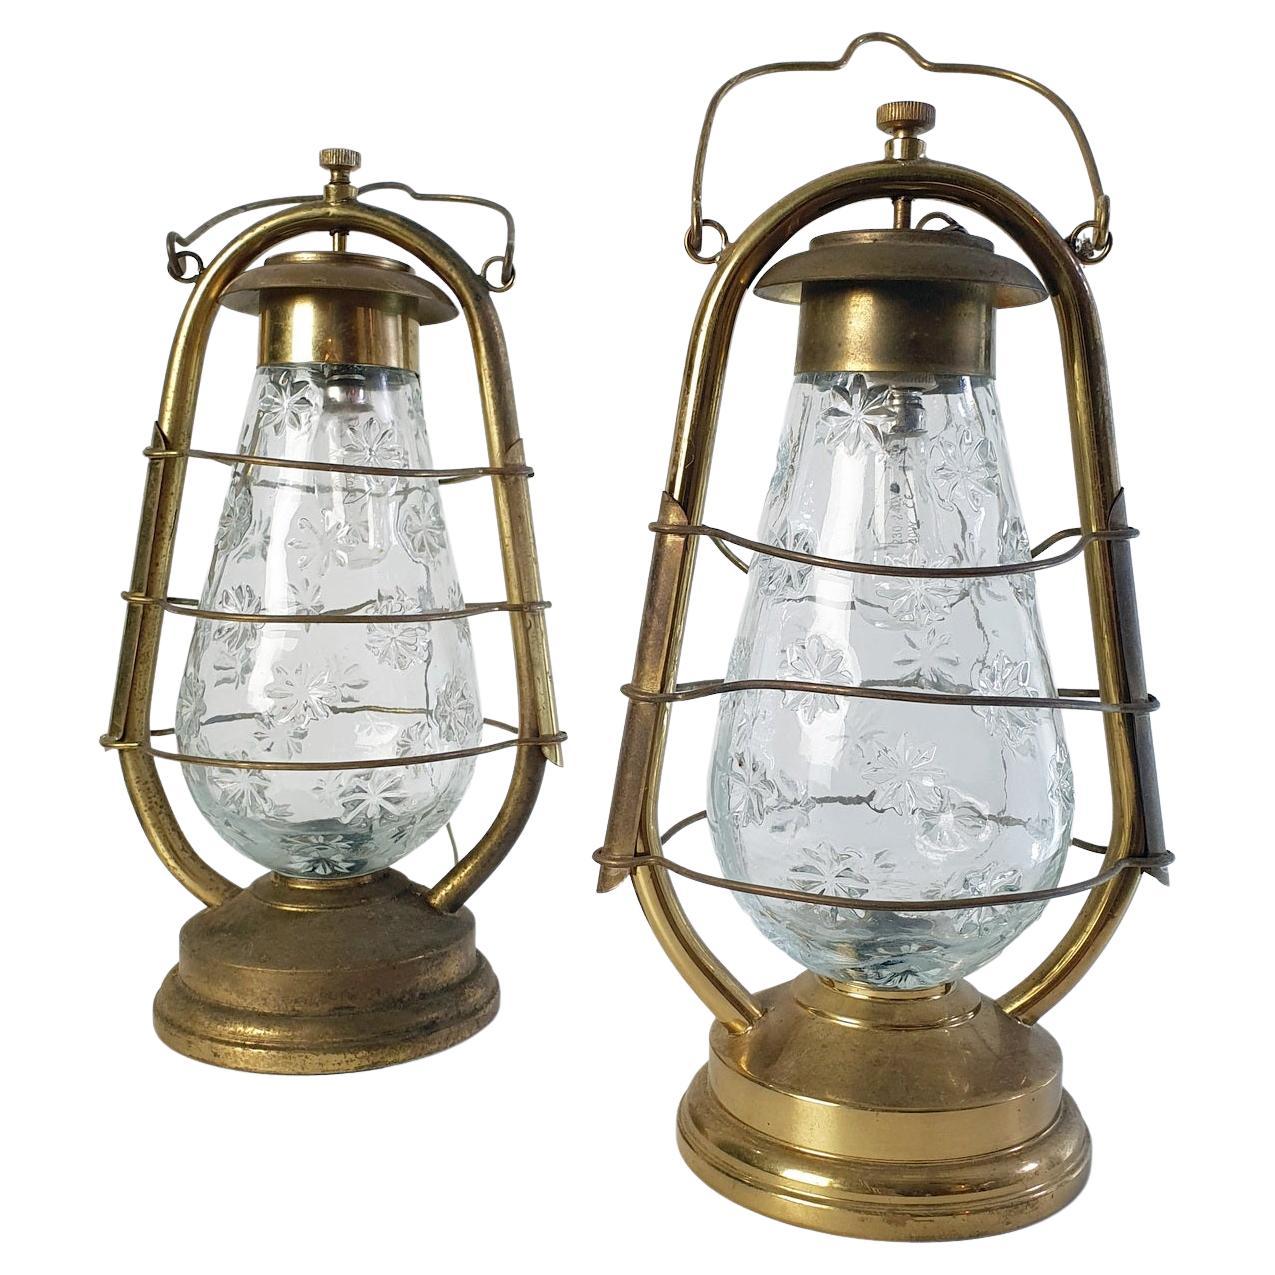 A pair of Italian lamps in the design of hurricane lanterns. The lamps are possible to use on the table or are hung from the wall or ceiling. In perfect working condition. Works with E14 lightbulbs.